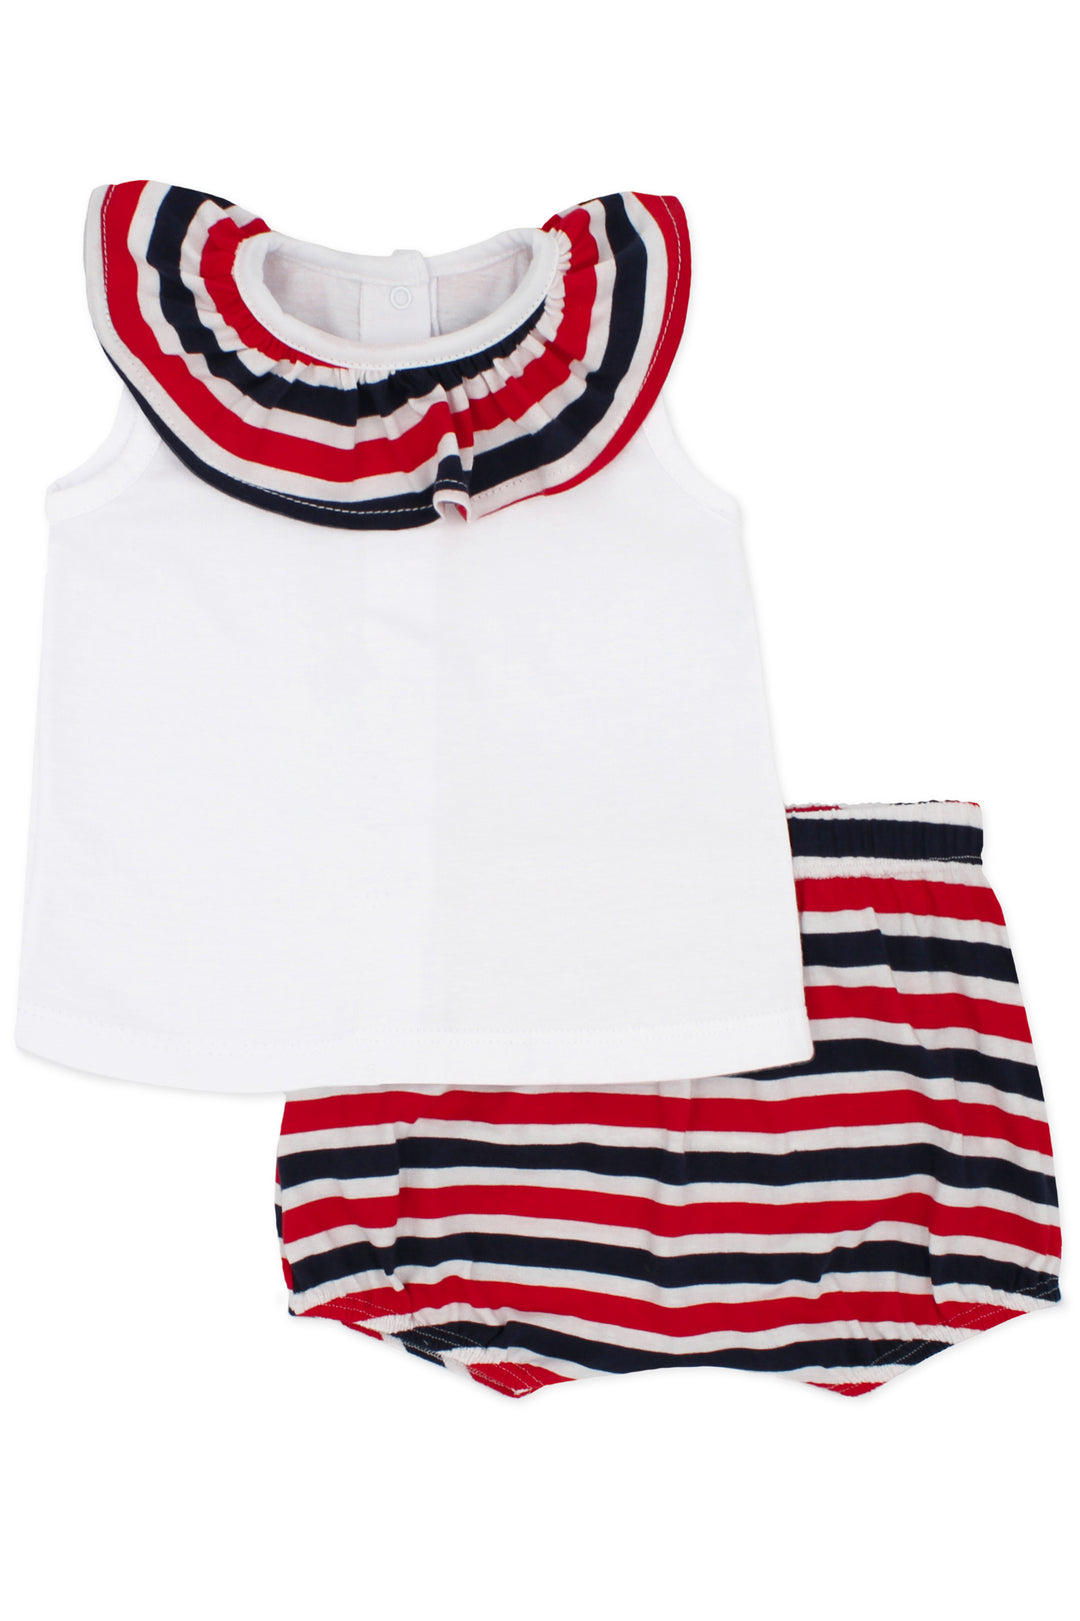 Rapife "Delphina" Red & Navy Stripe Blouse & Bloomers | Millie and John